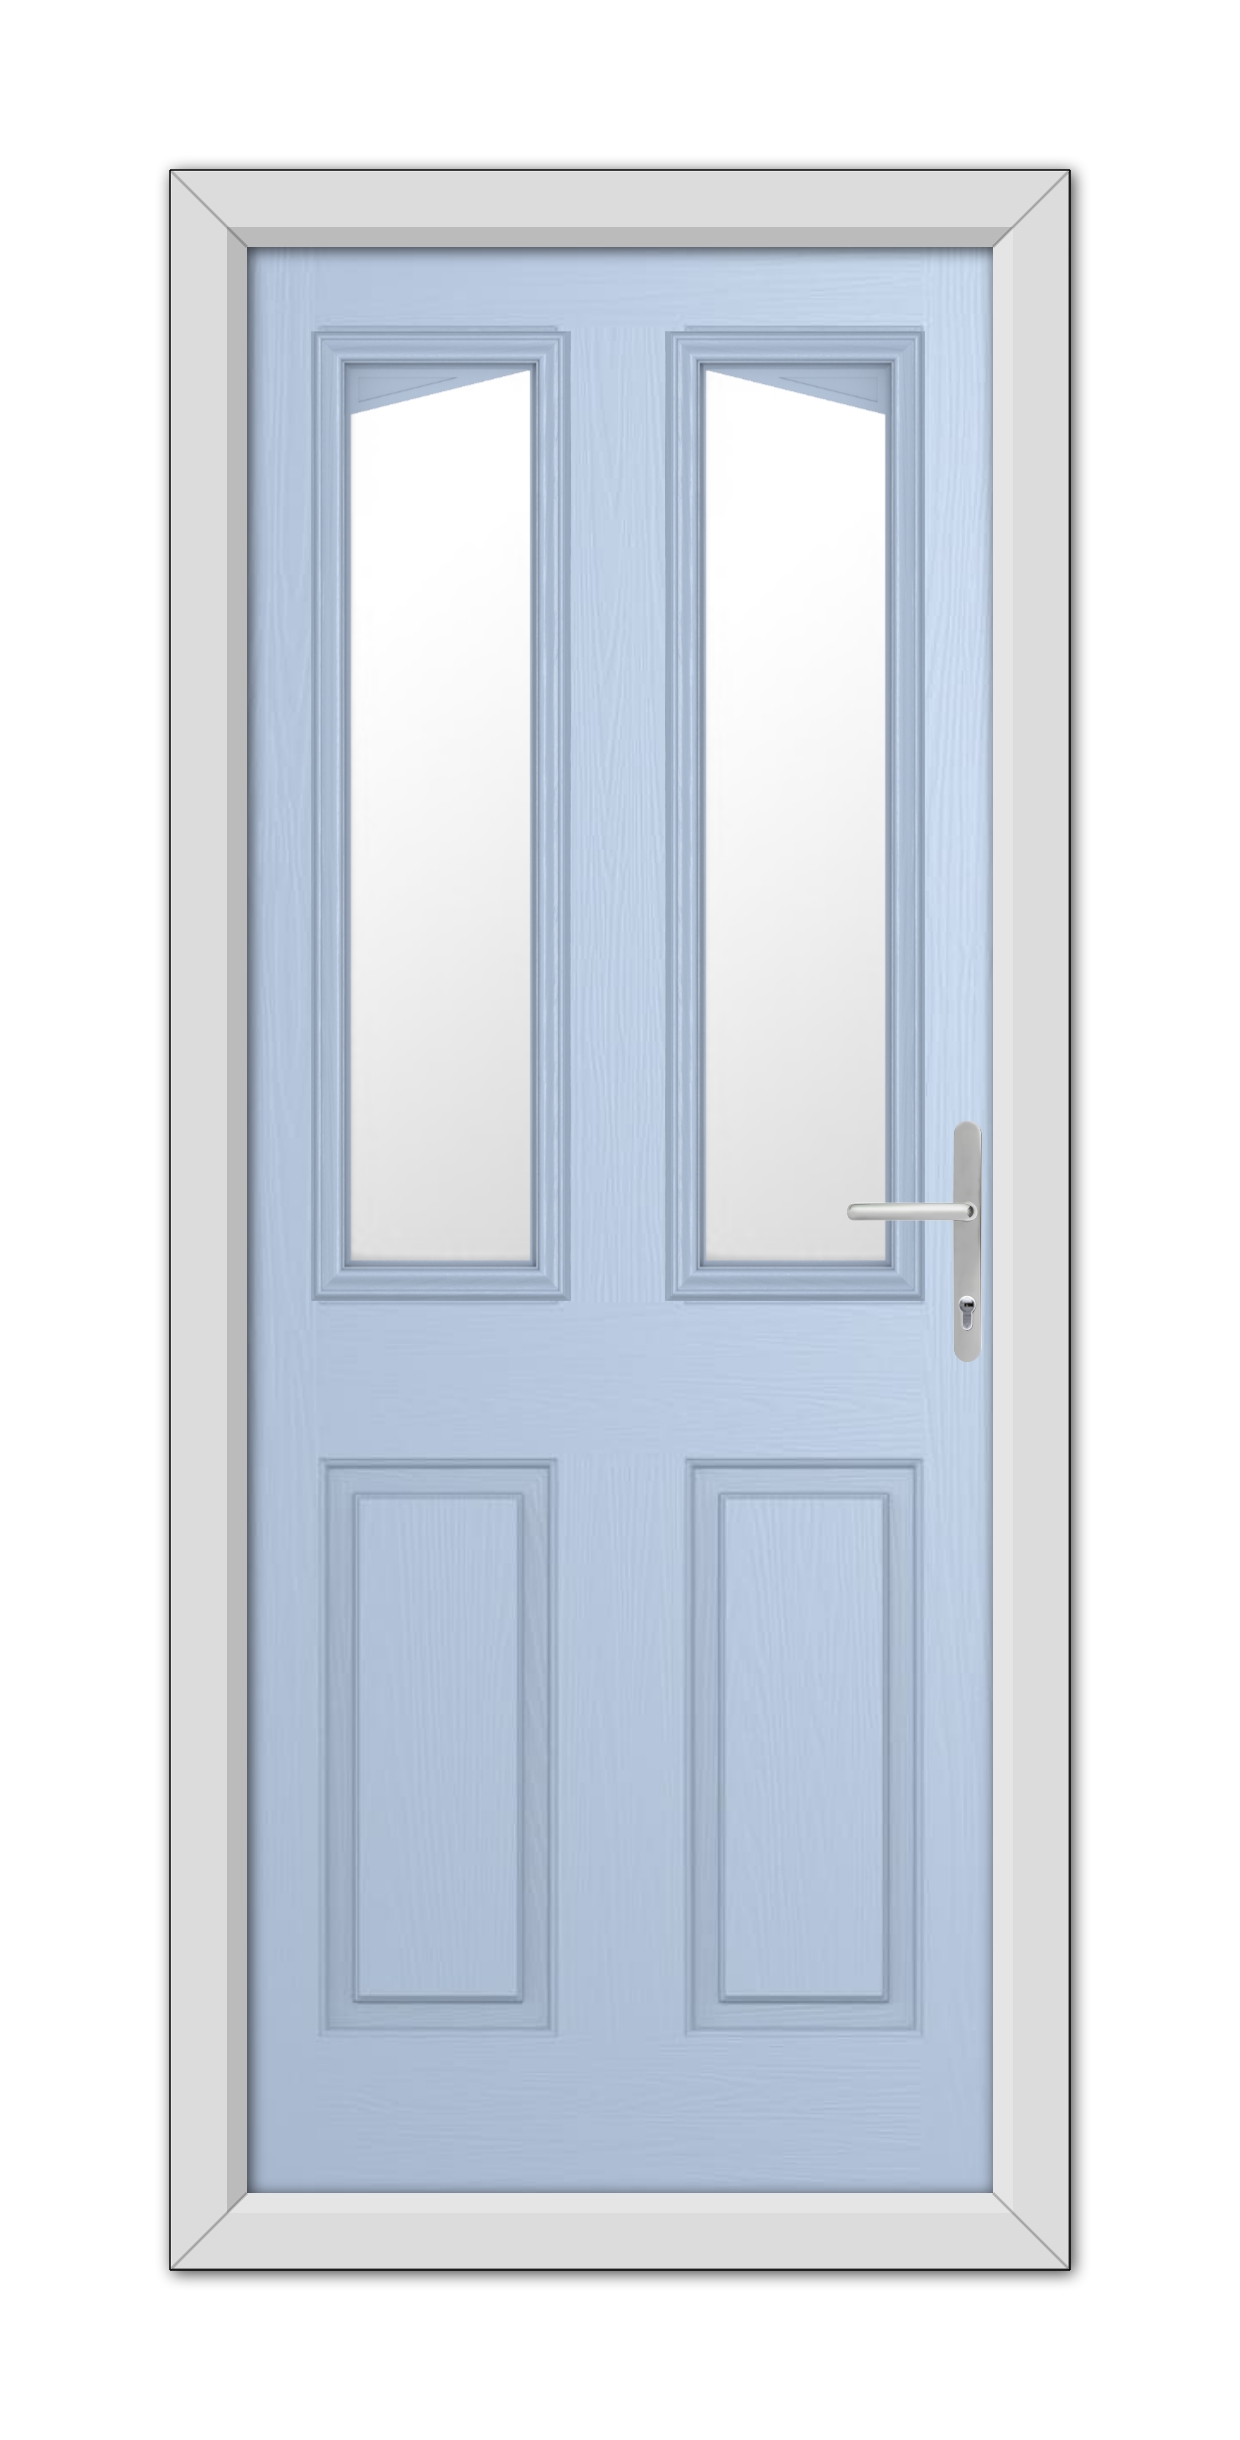 A Duck Egg Blue Highbury Composite Door 48mm Timber Core with glass panels on the upper half, a white doorframe, and a modern handle on the right.